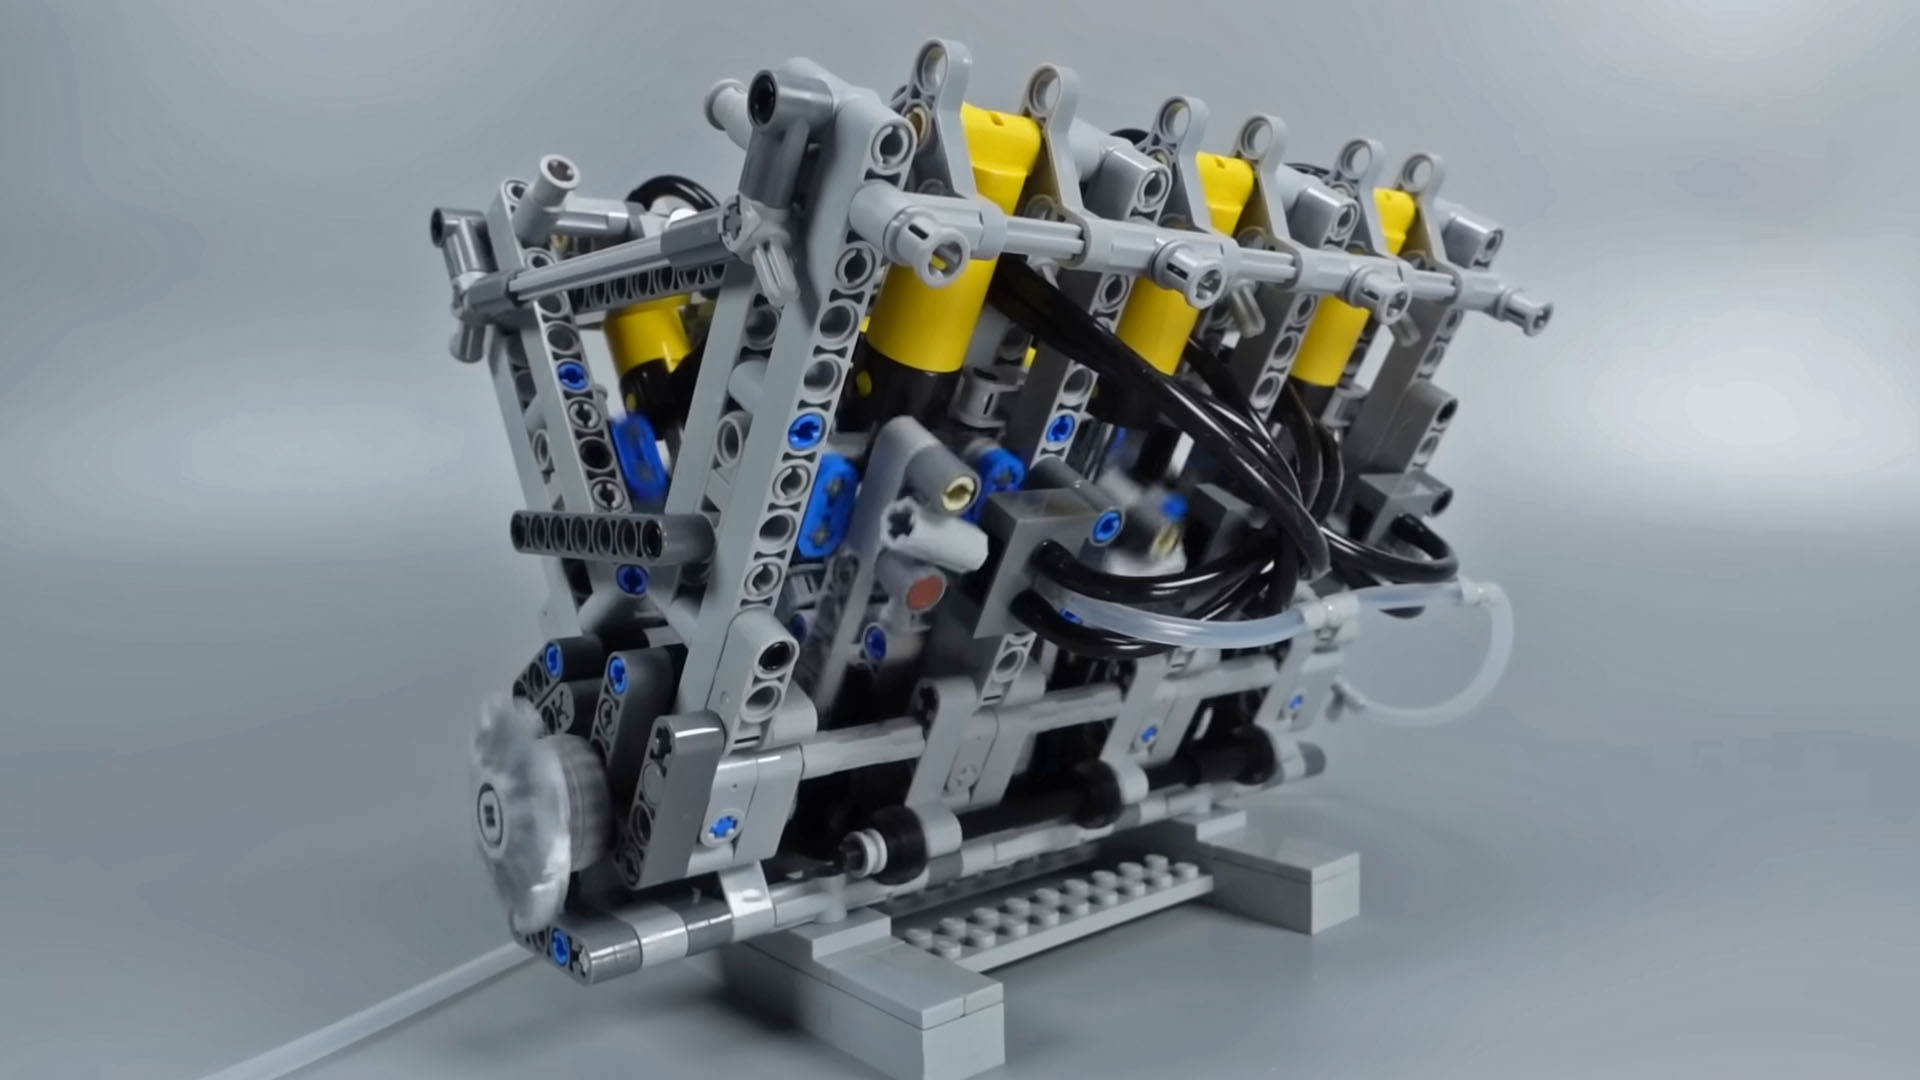 fest føderation forpligtelse These Air-Powered Lego Piston Engines Are Hypnotizing To Watch